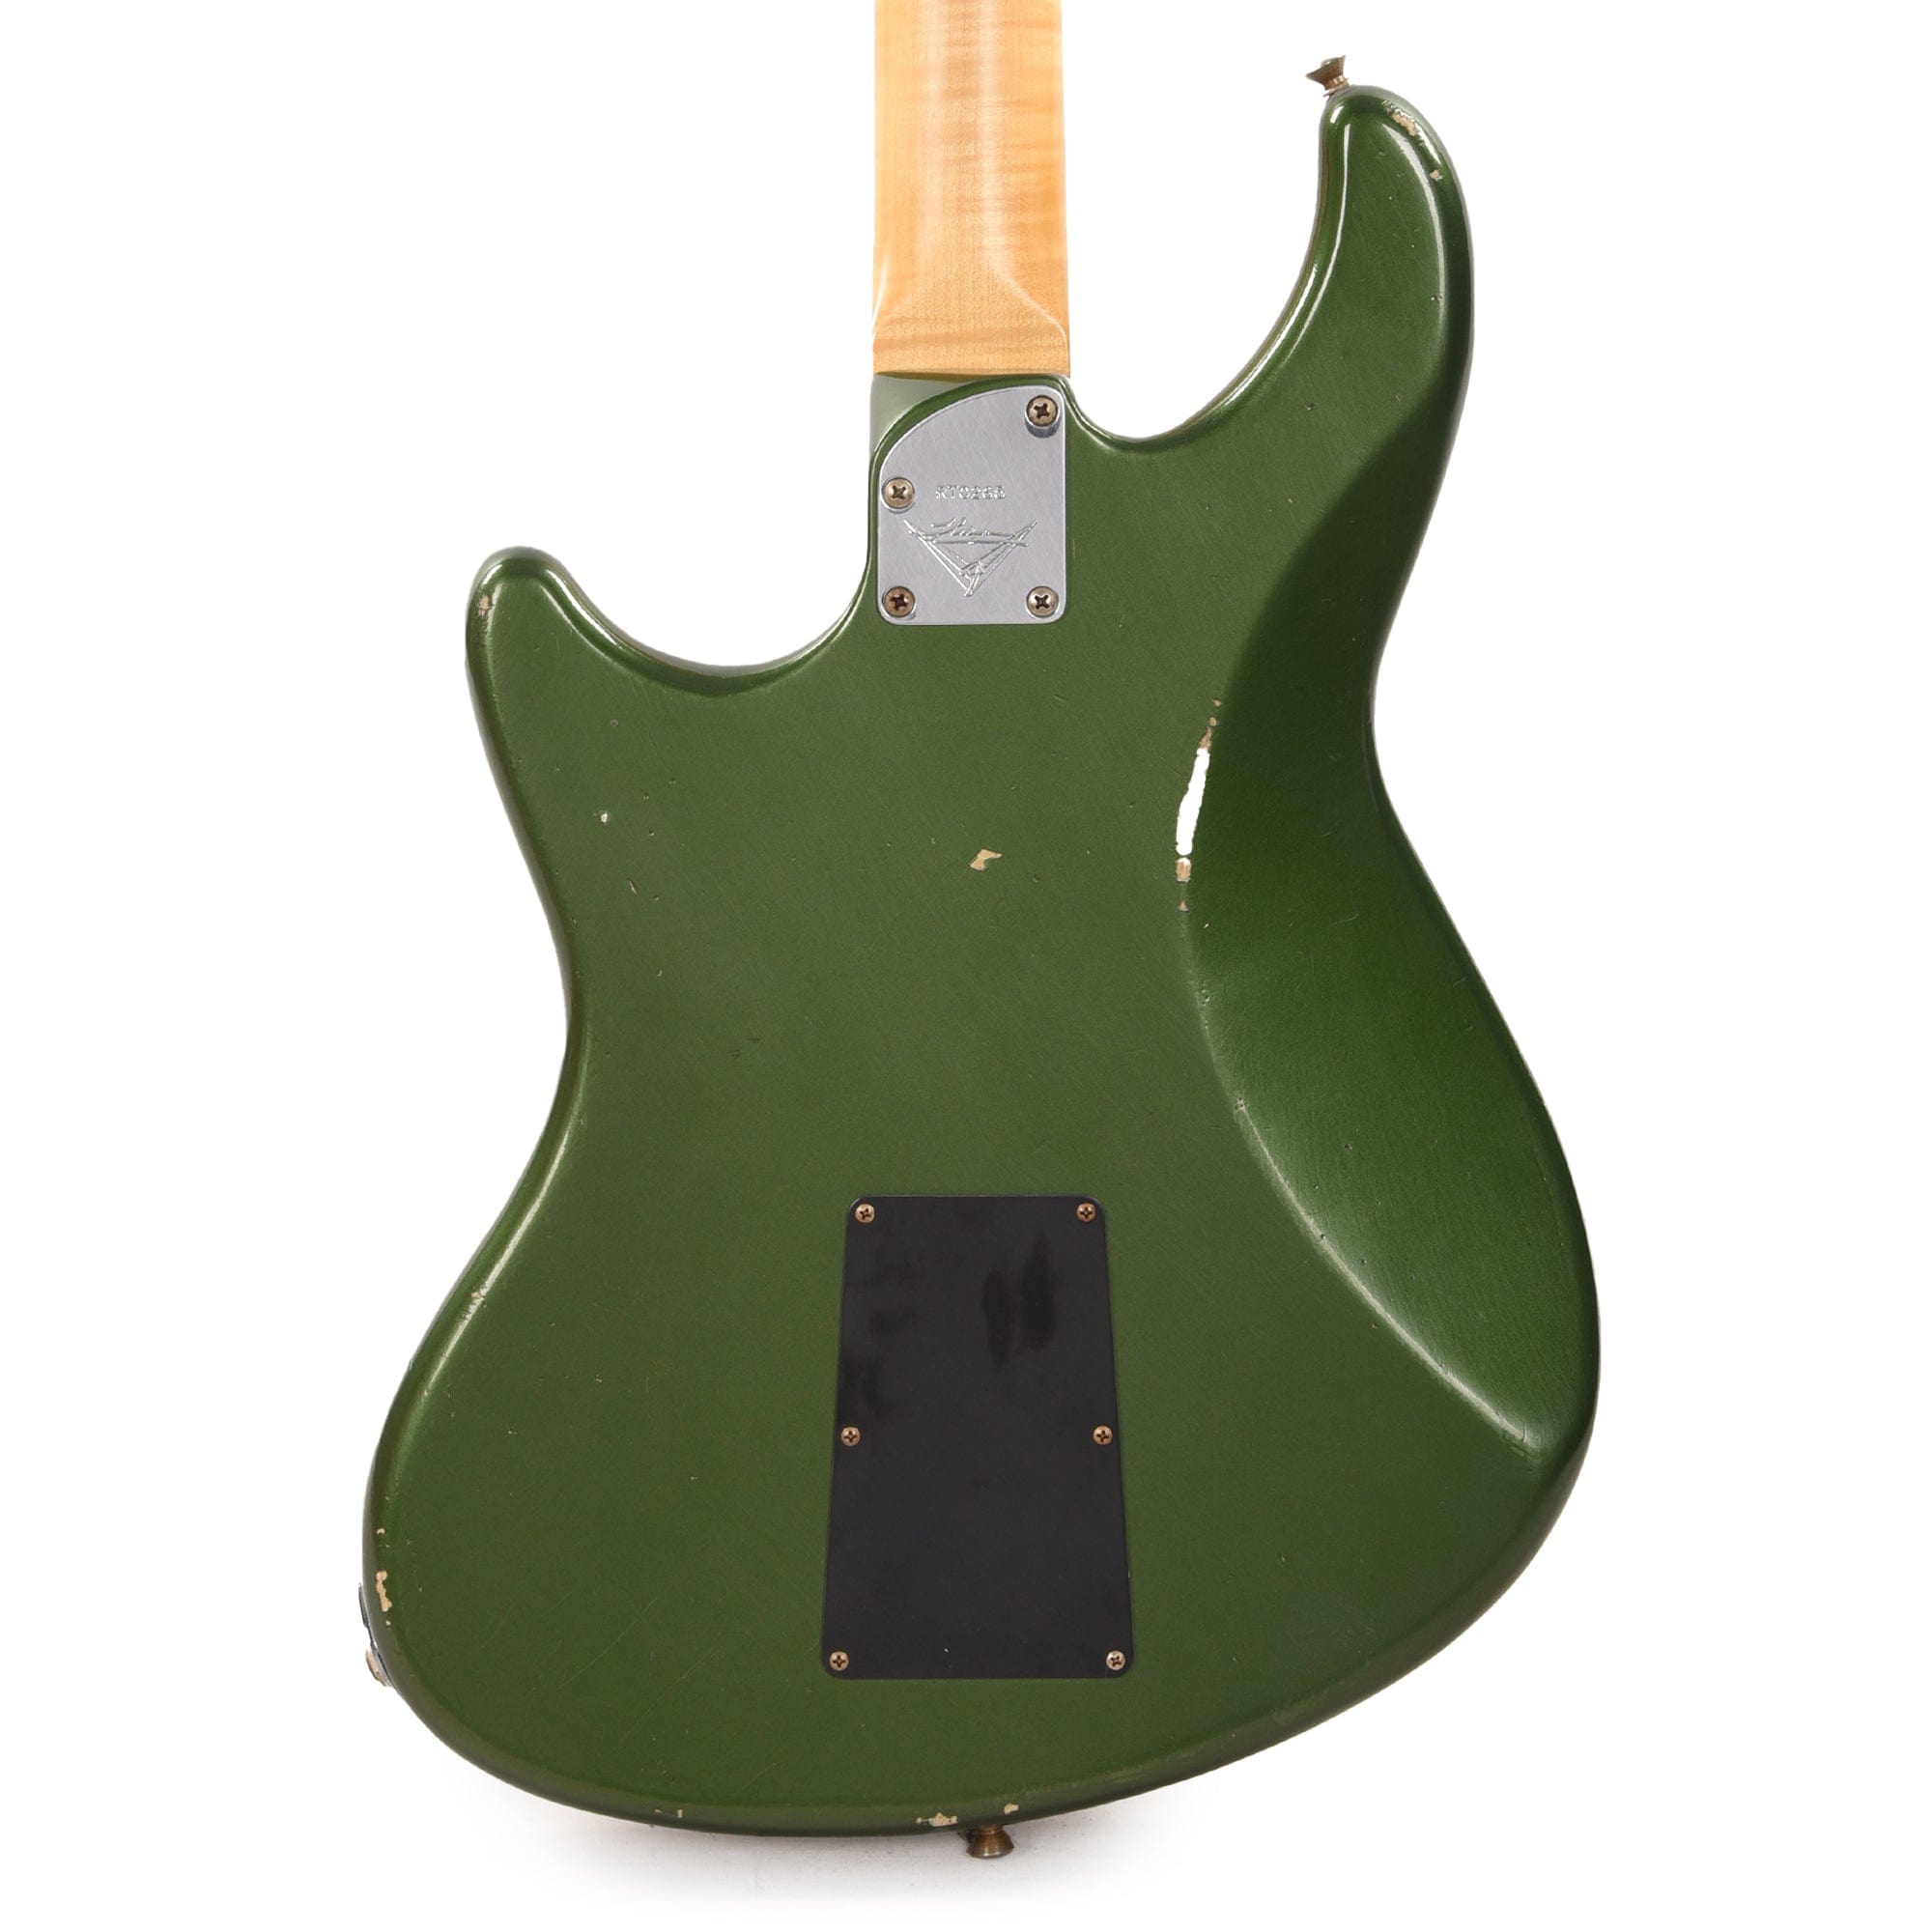 Fender Custom Shop California Special Journeyman Aged Cadillac Green Master Built by Ron Thorn Electric Guitars / Solid Body